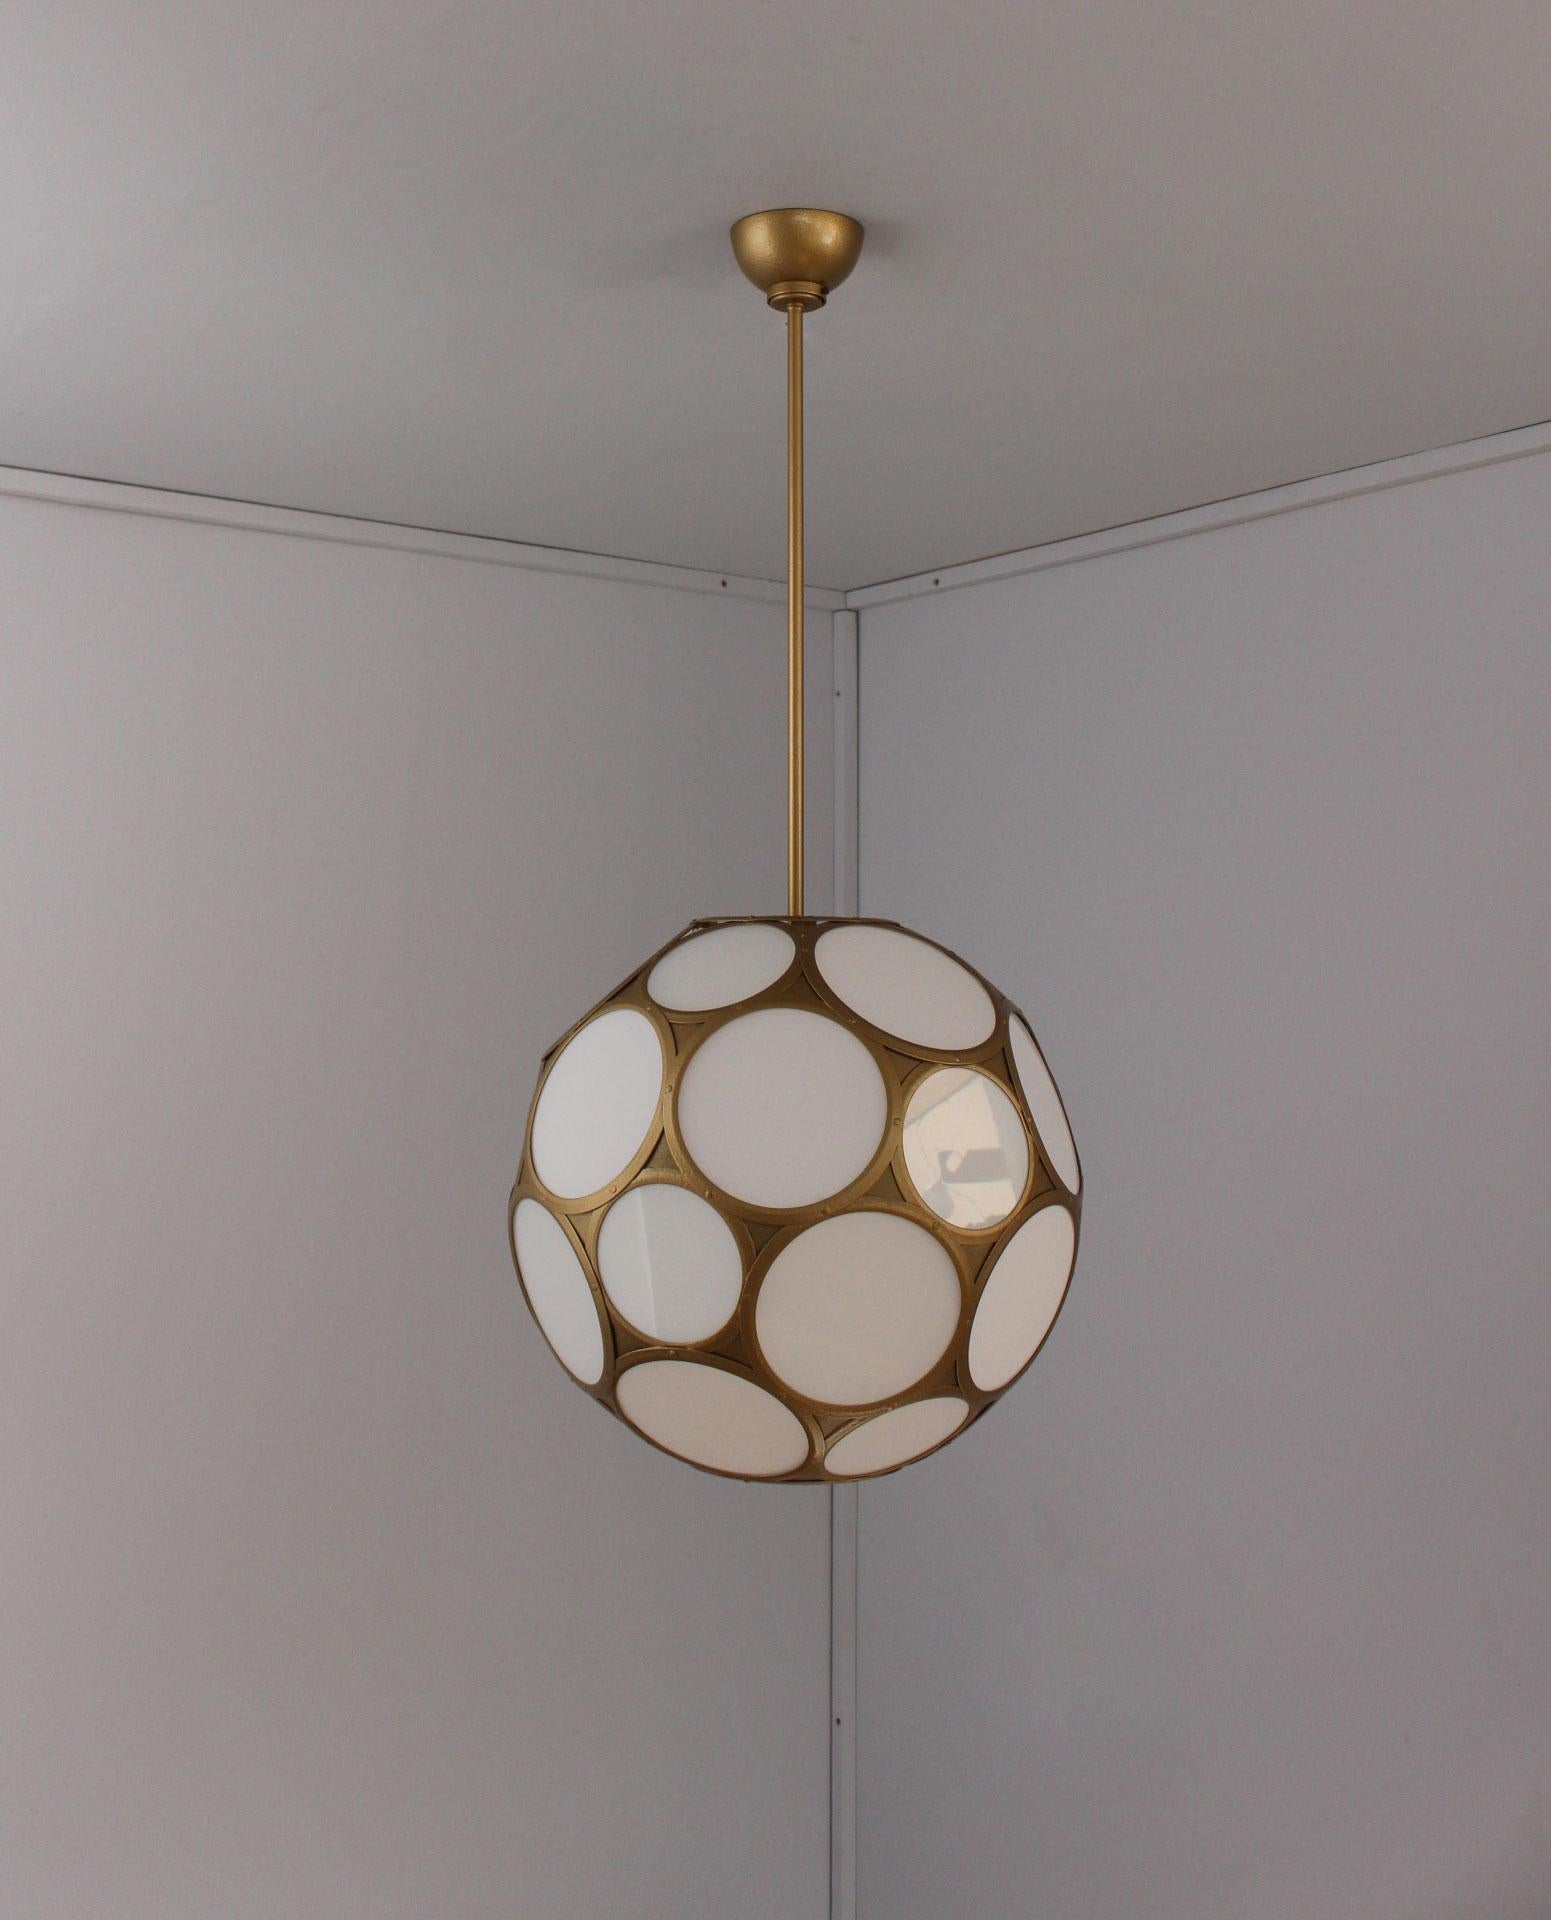 With round white enameled glass inserts forming a multifaceted sphere suspended from a golden painted metal rod and canopy.

  